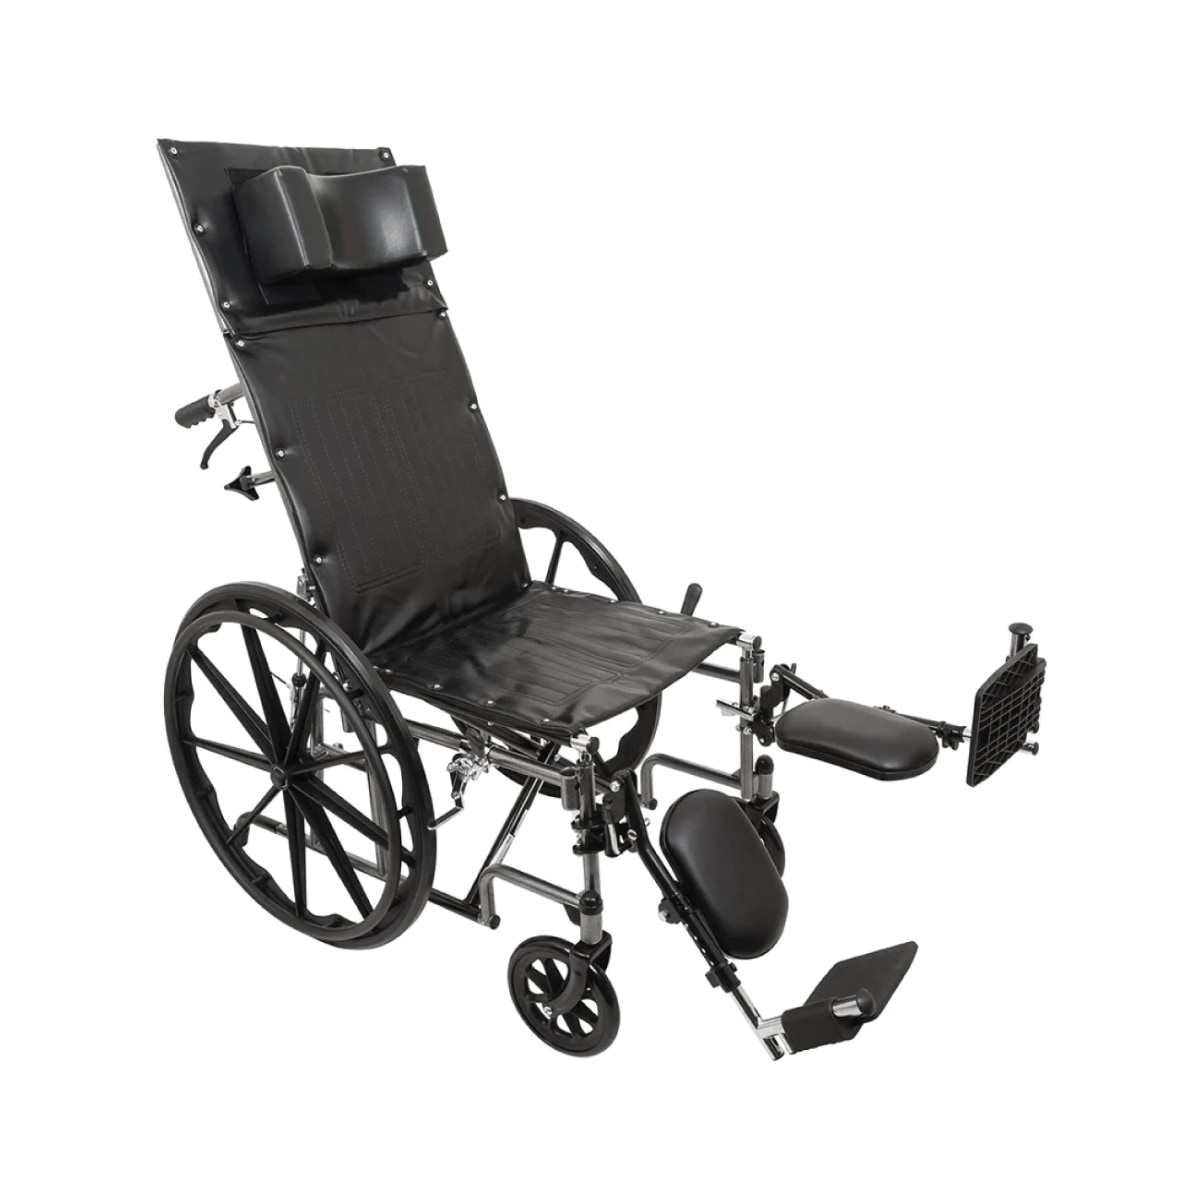 Compass Health Reclining Wheelchair with tall back and headrest